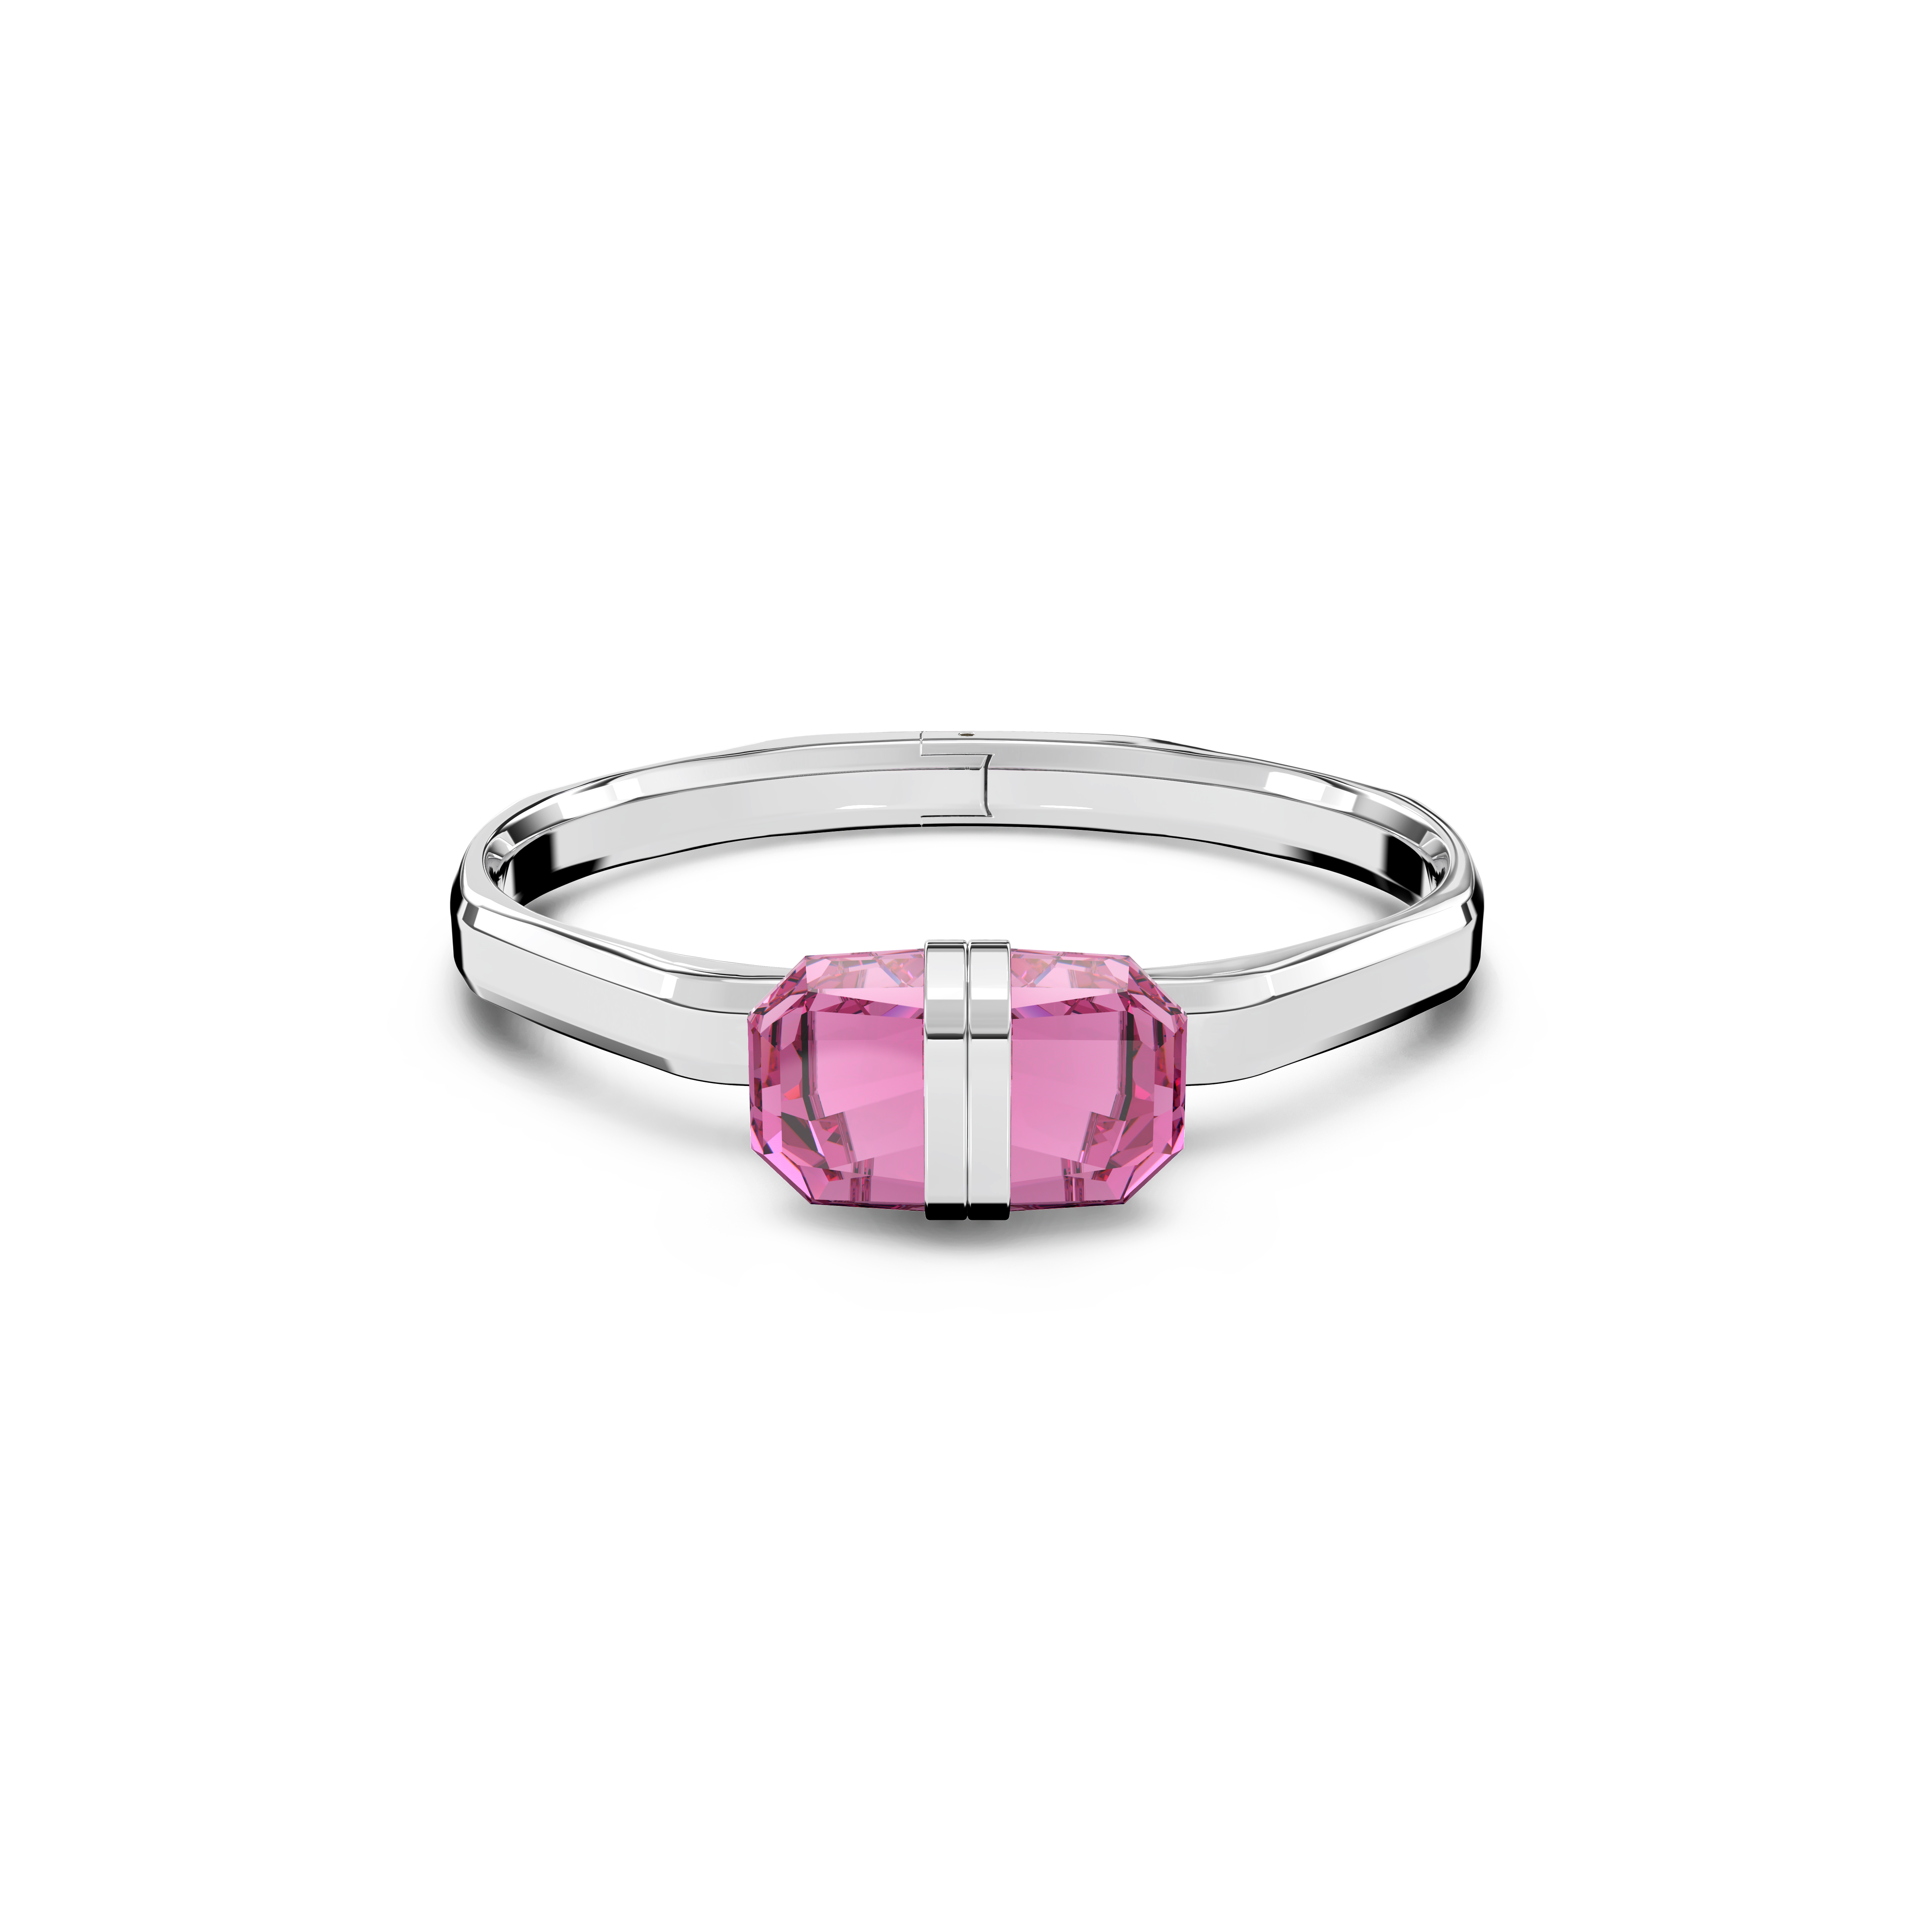 SWAROVSKI LUCENT BANGLE, MAGNETIC CLOSURE, PINK, STAINLESS STEEL